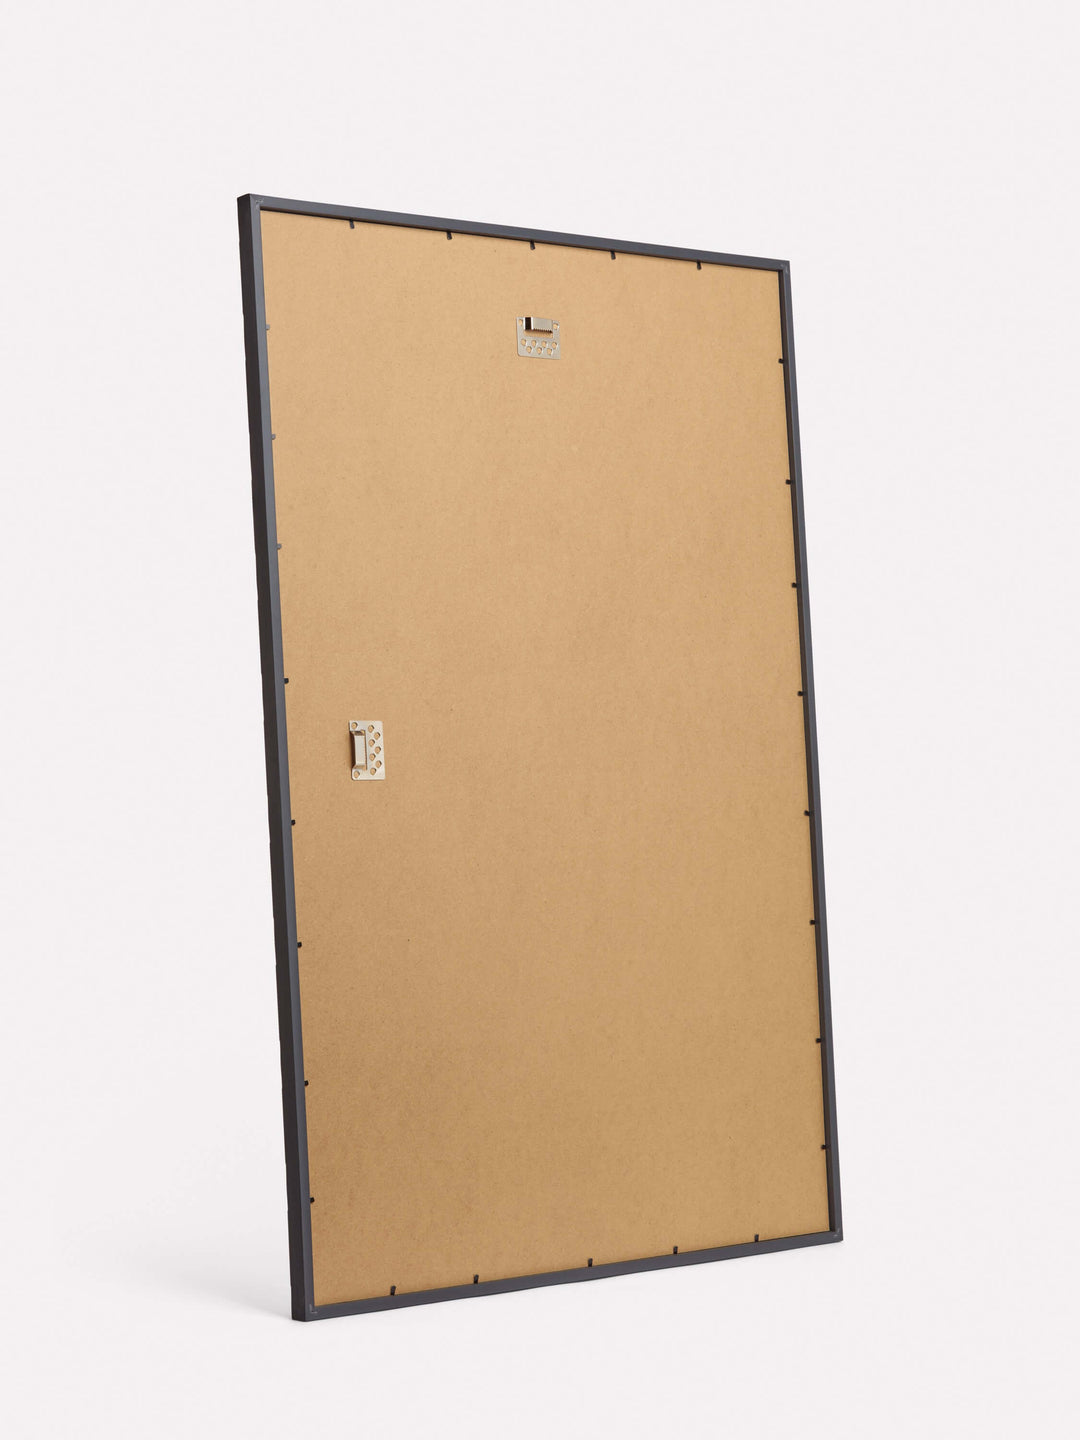 24x36-inch Bamboo Frame, Black - Back view